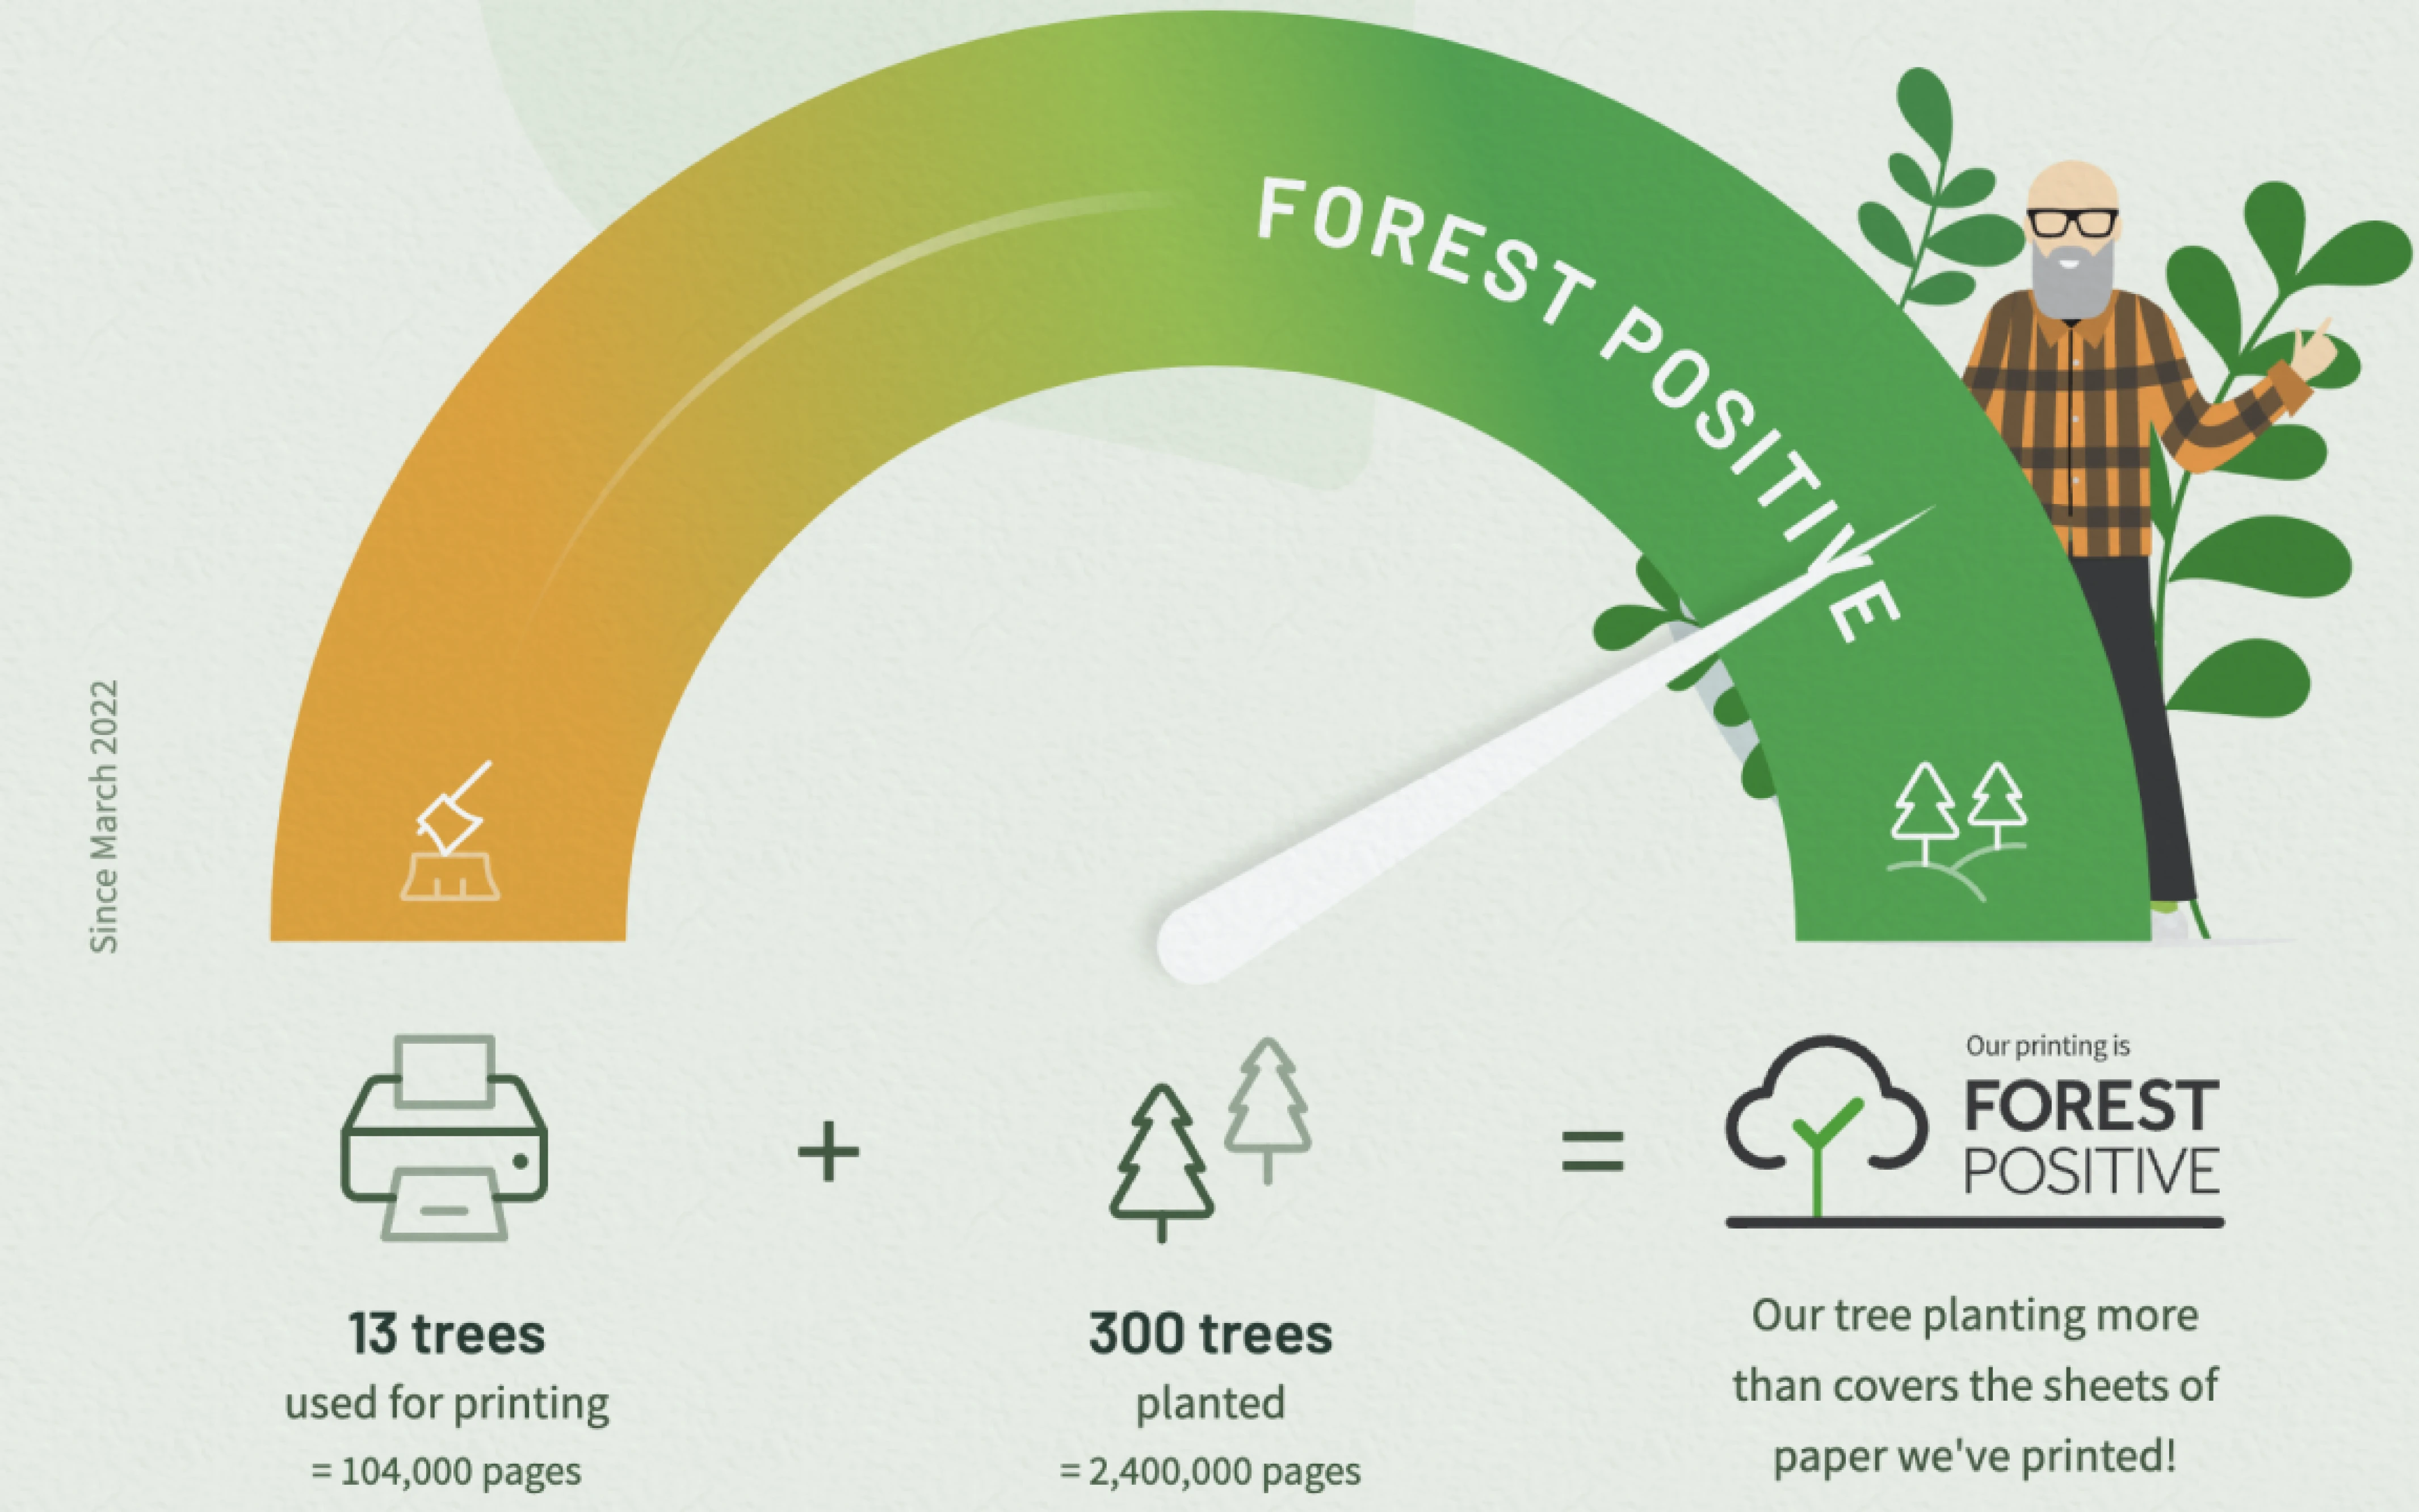  Forest positive screen 